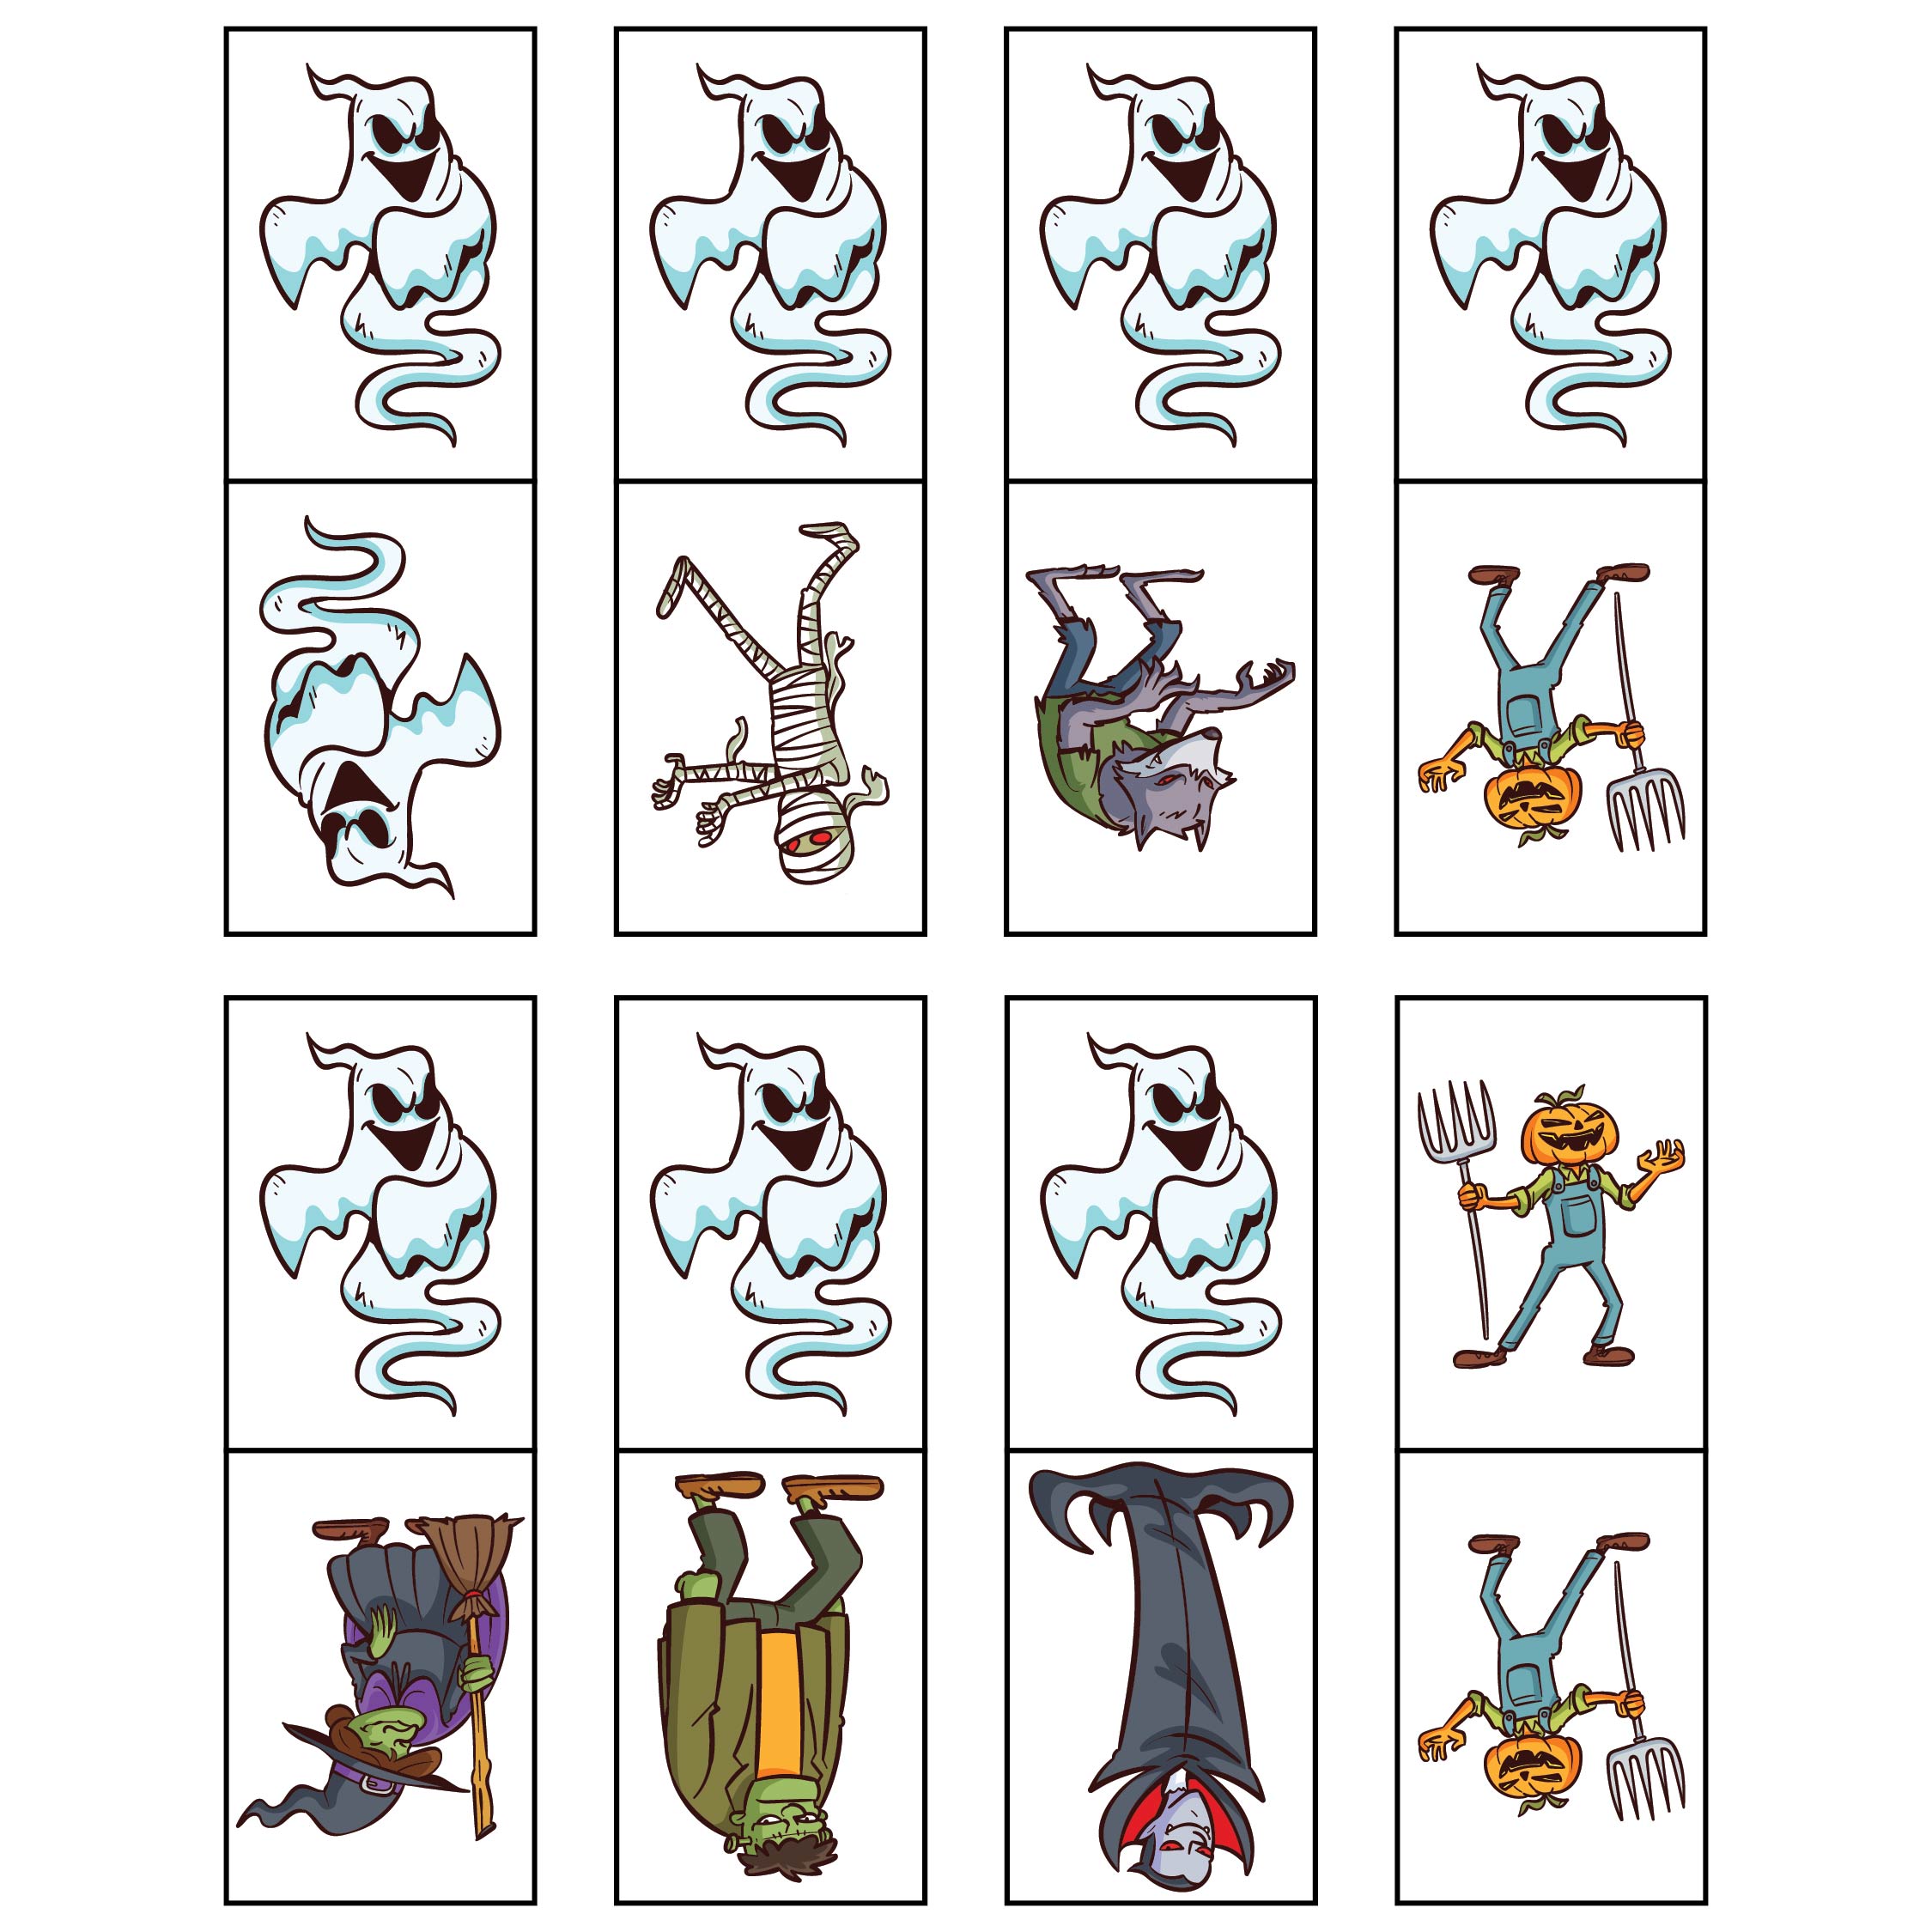 5-best-images-of-black-and-white-halloween-memory-game-printable